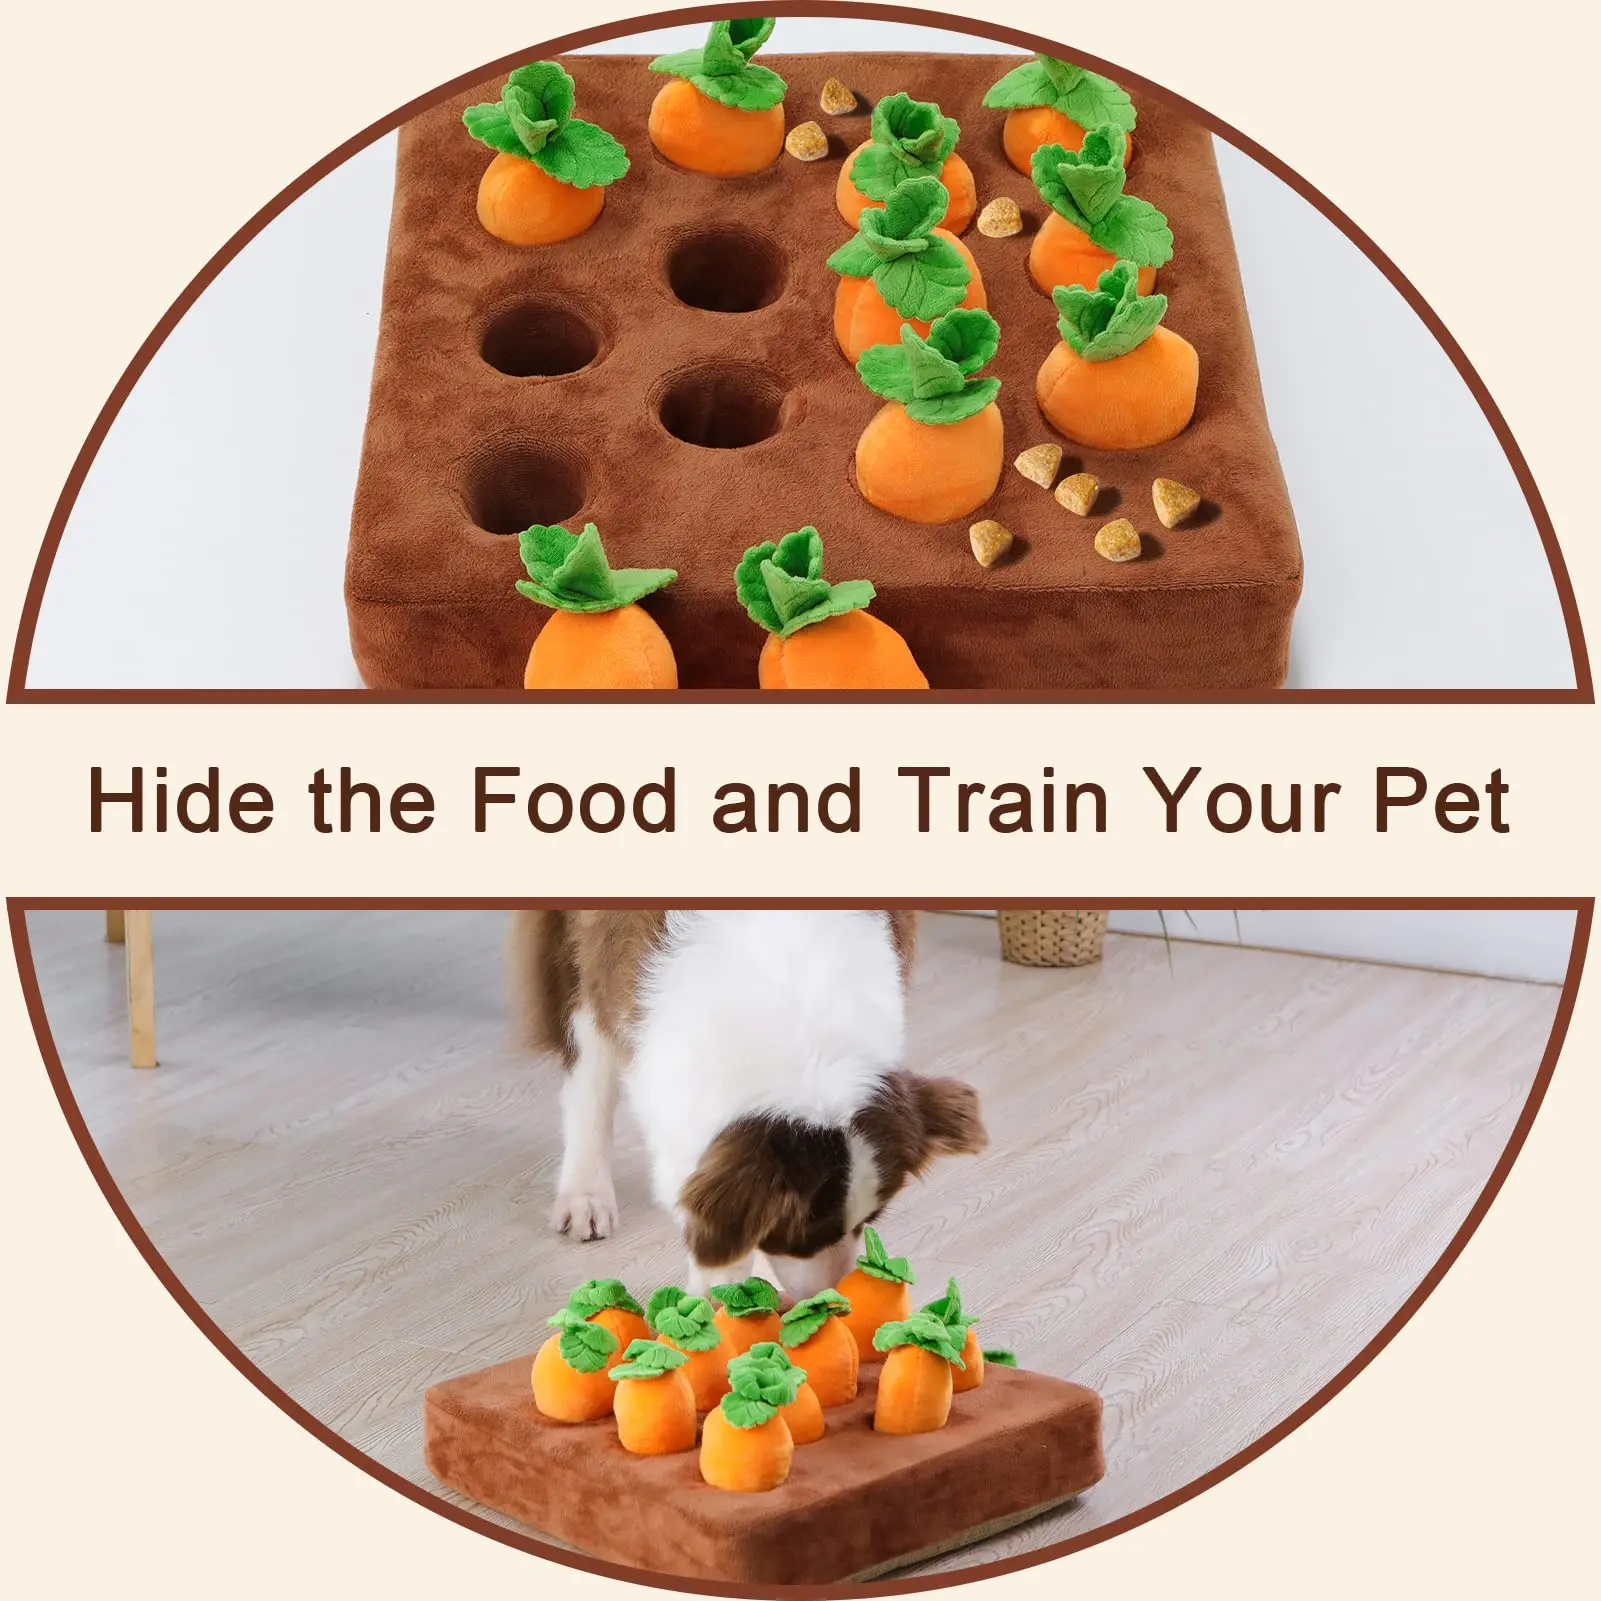 Interactive Dog Toy Squeaky Carrots Enrichment Puzzle Toys, Hide and Seek, Carrot  Farm, Dog Chew, Carrot Patch Snuffle Patch - AliExpress